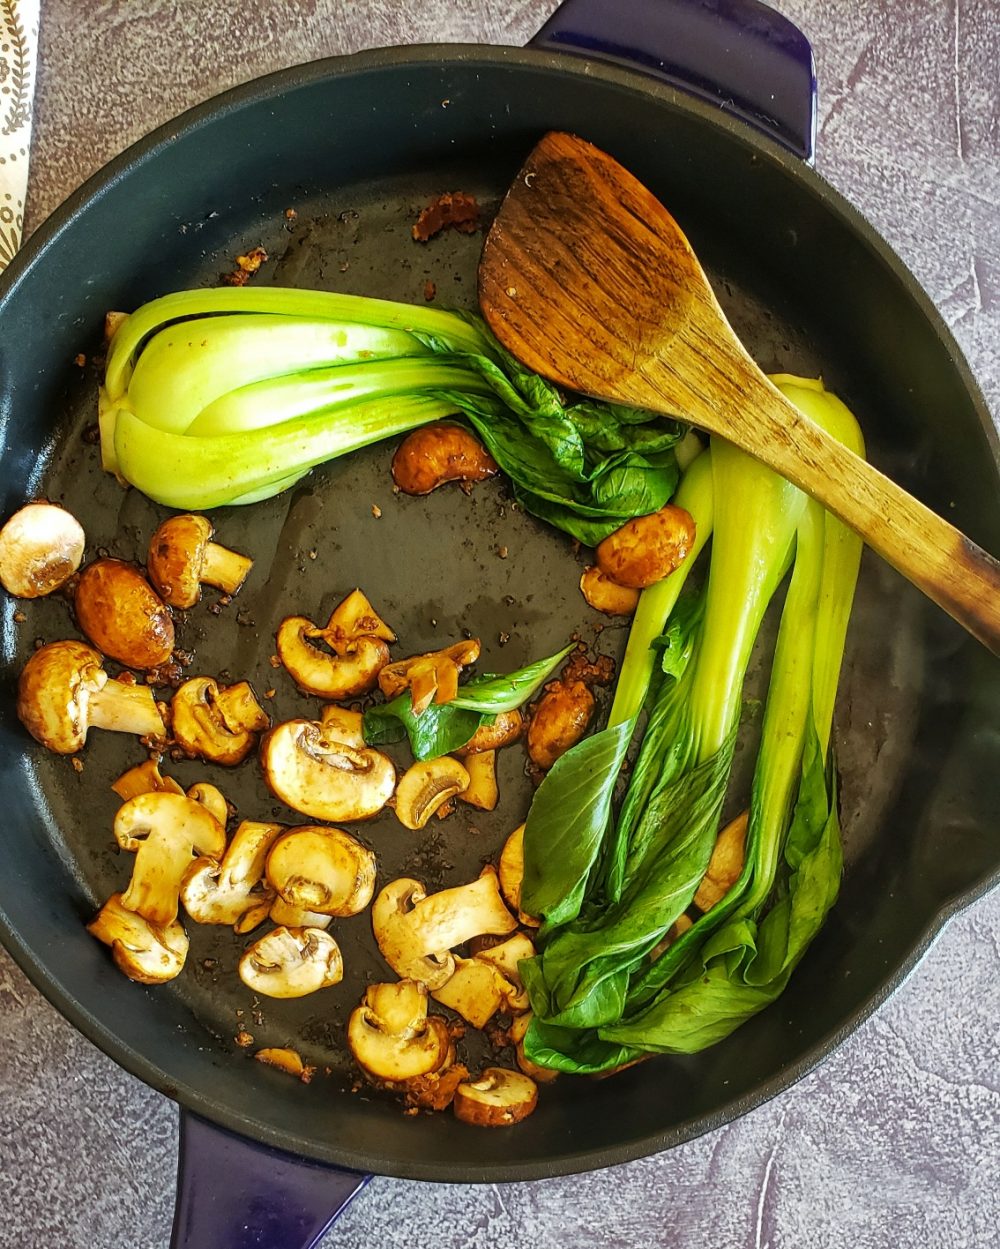 Saute mushrooms and bok choy as the final step